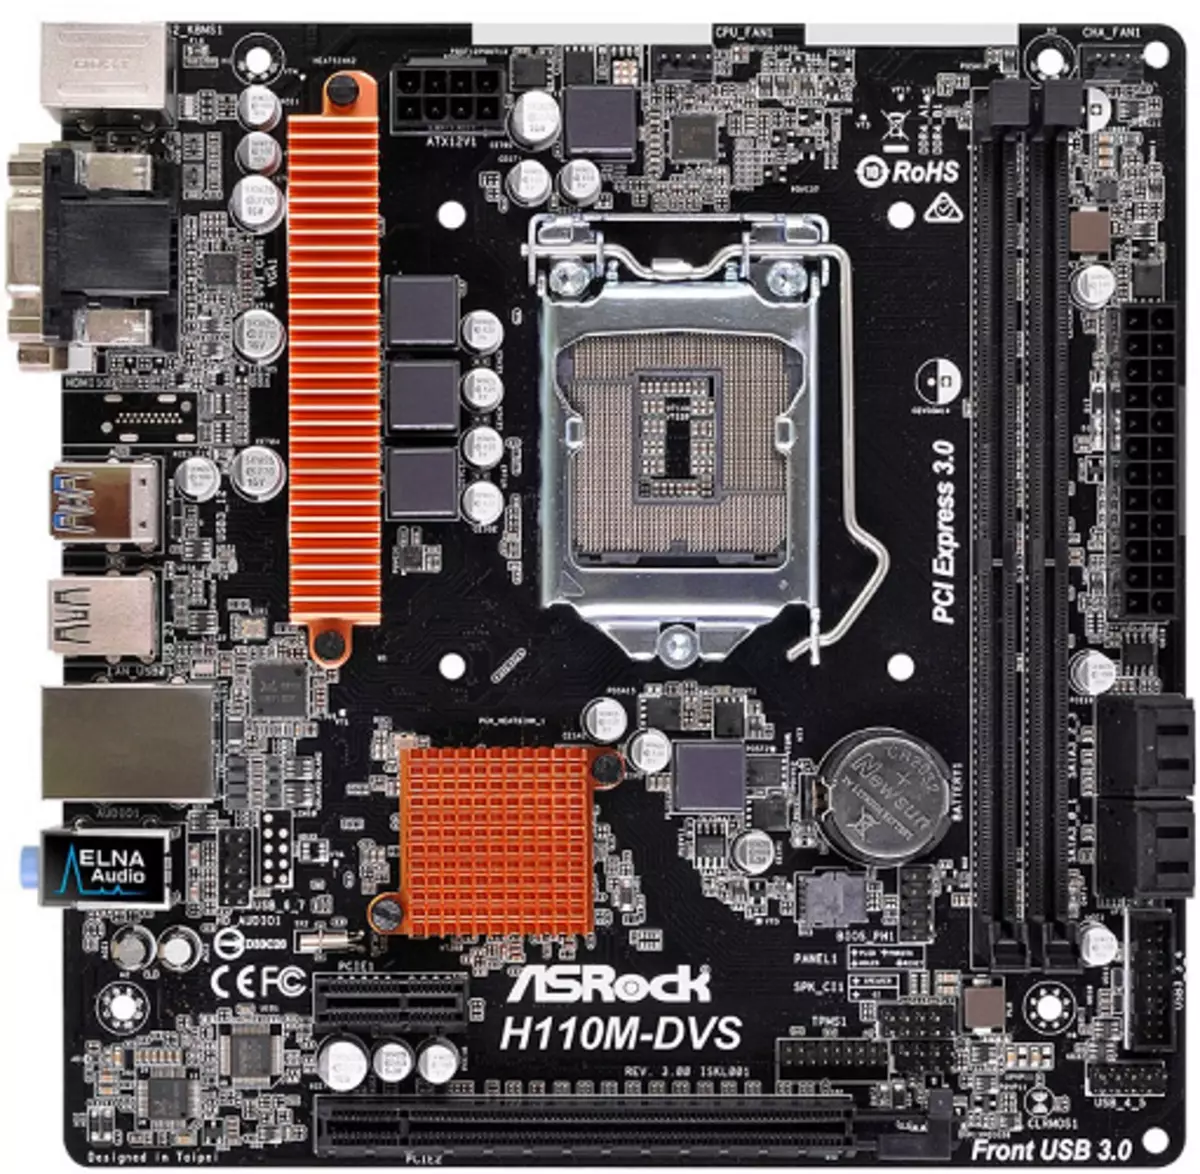 General view of the motherboard ASRock H110M-DGS